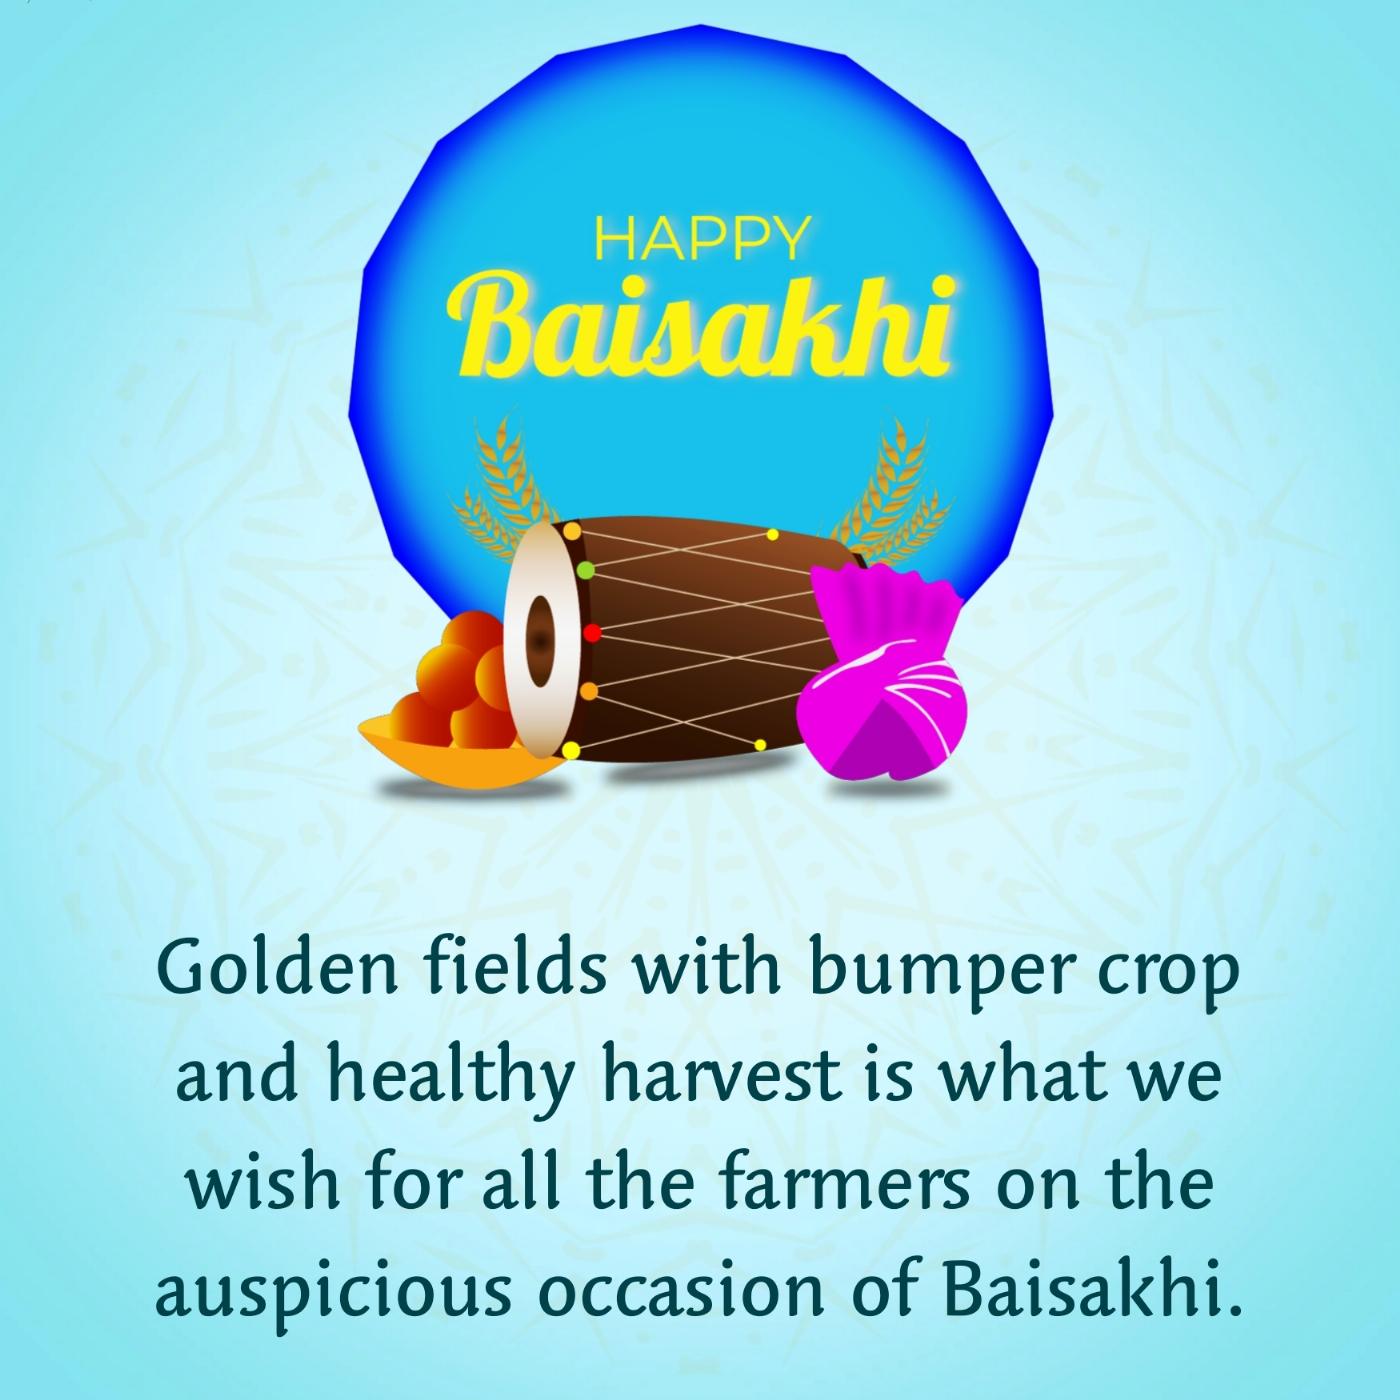 Golden fields with bumper crop and healthy harvest